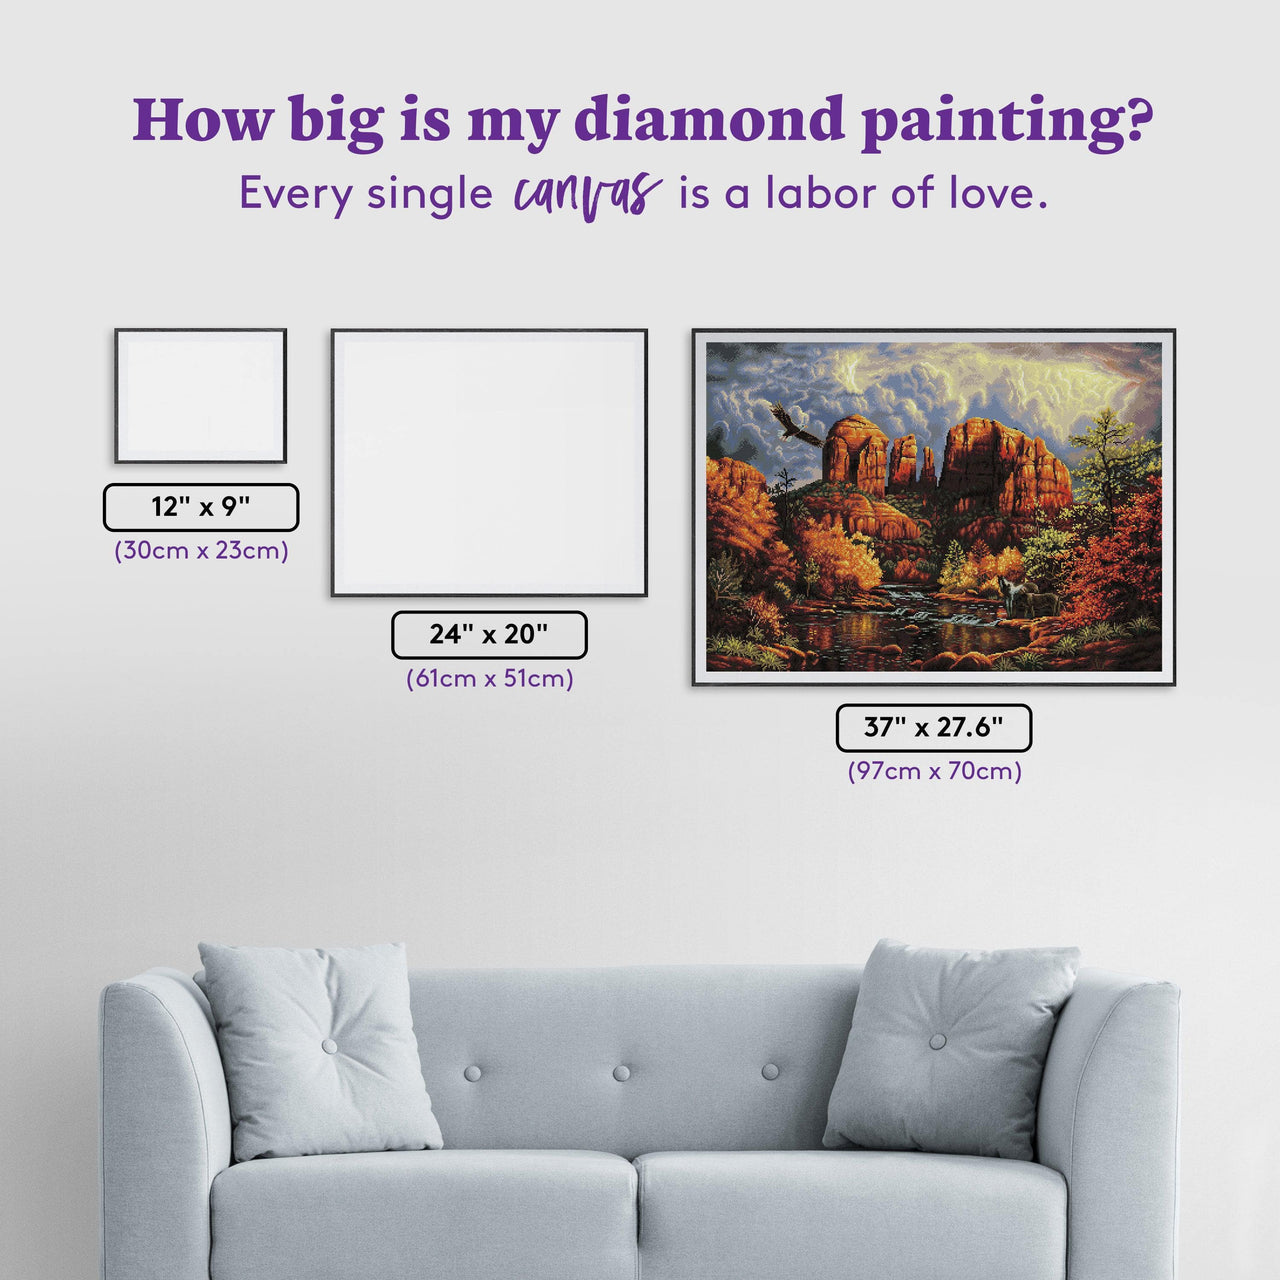 Diamond Painting Sedona Majesty 37" x 27.6" (97cm x 70cm) / Square with 59 Colors including 3 ABs / 109,309